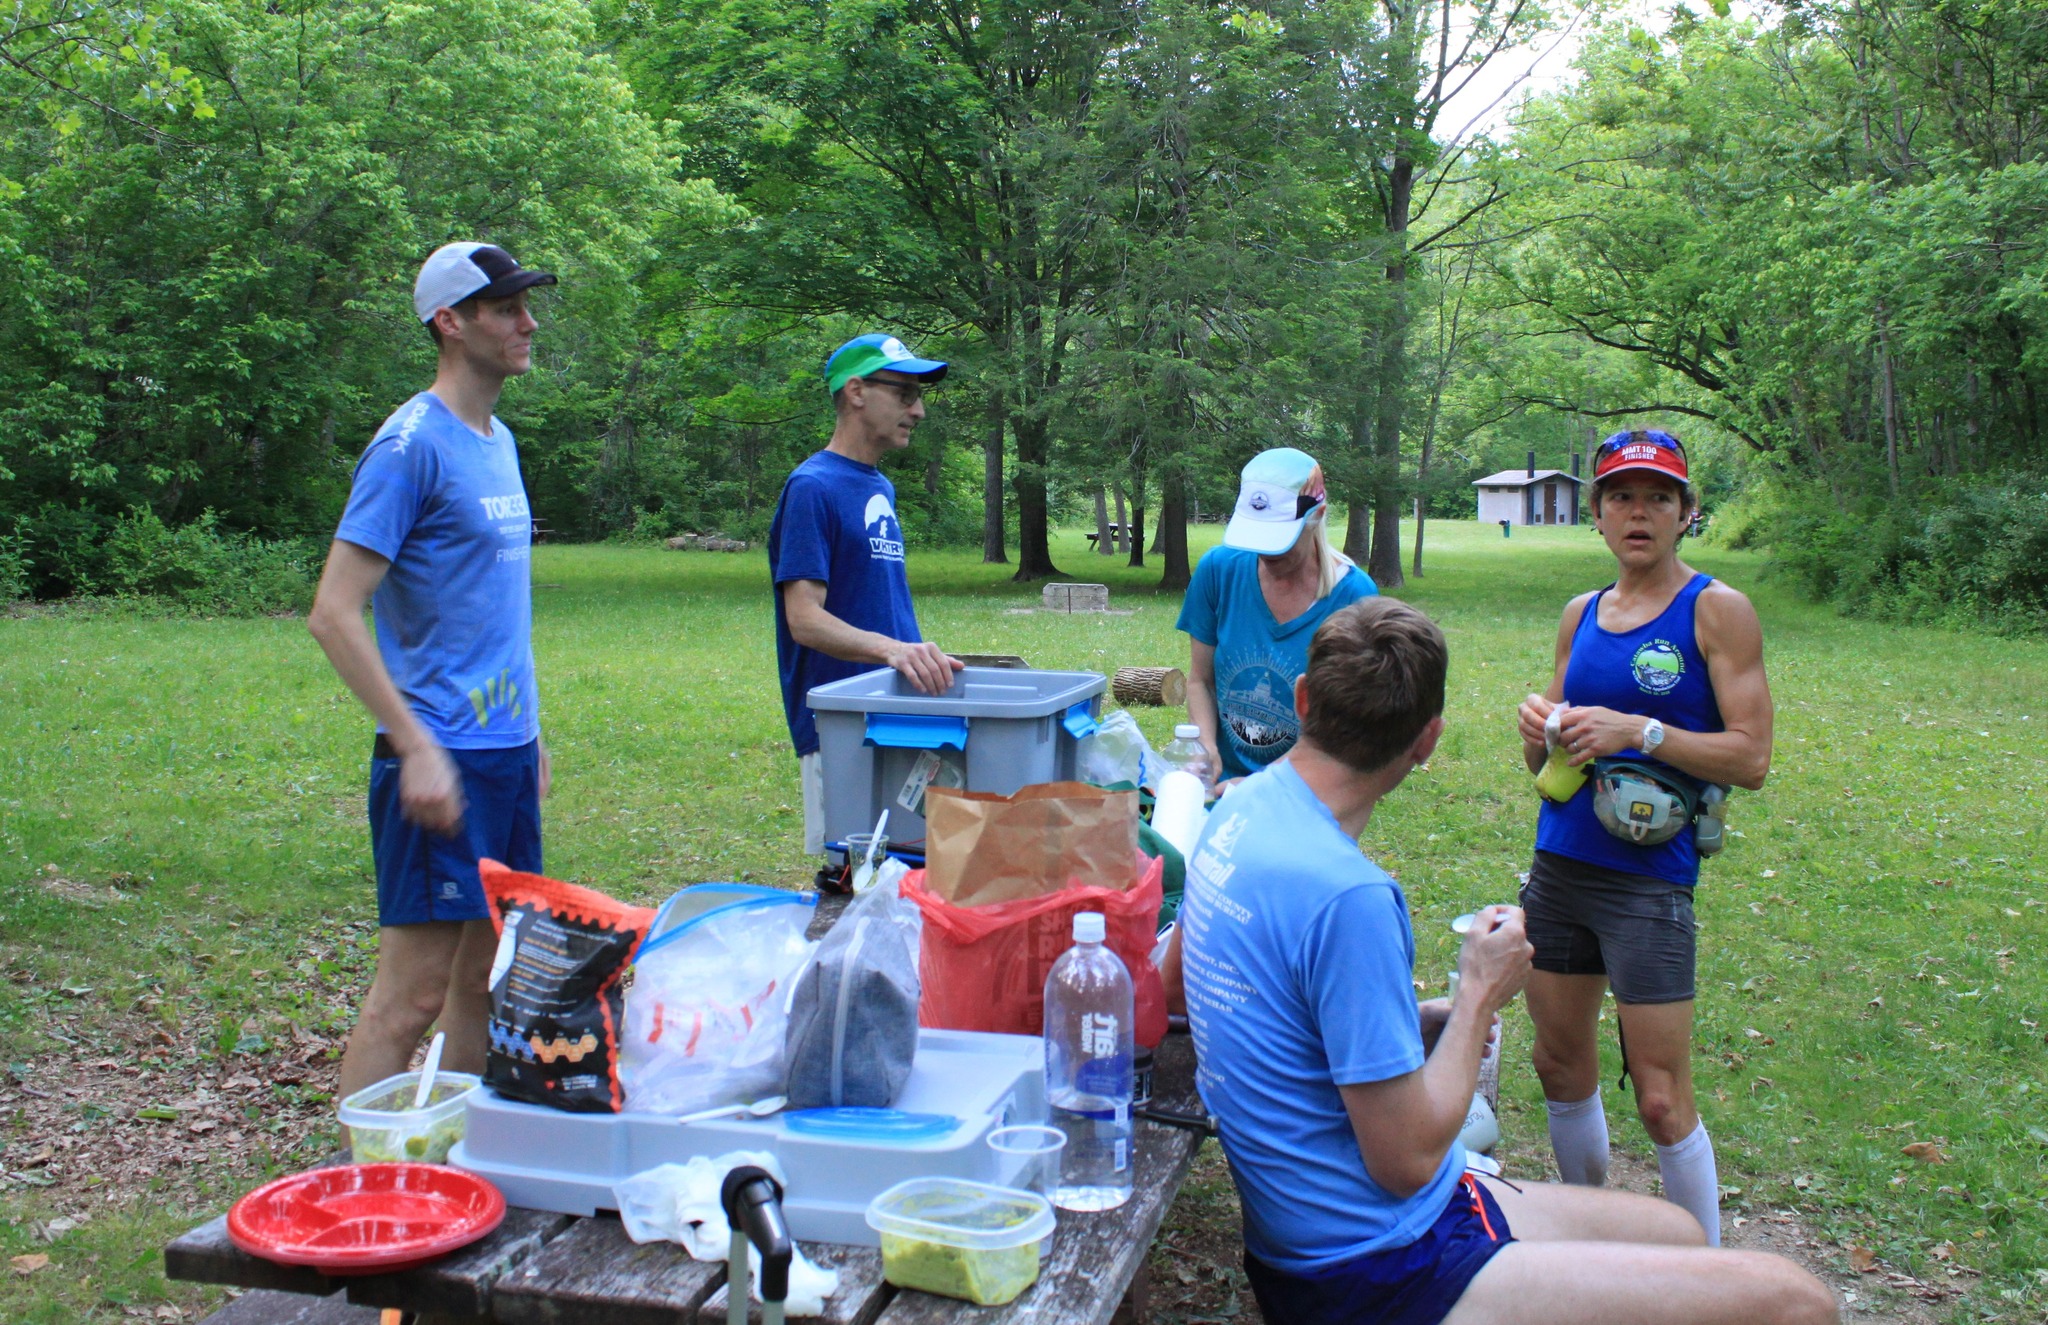 Runners around a picnic table receiving aid.  